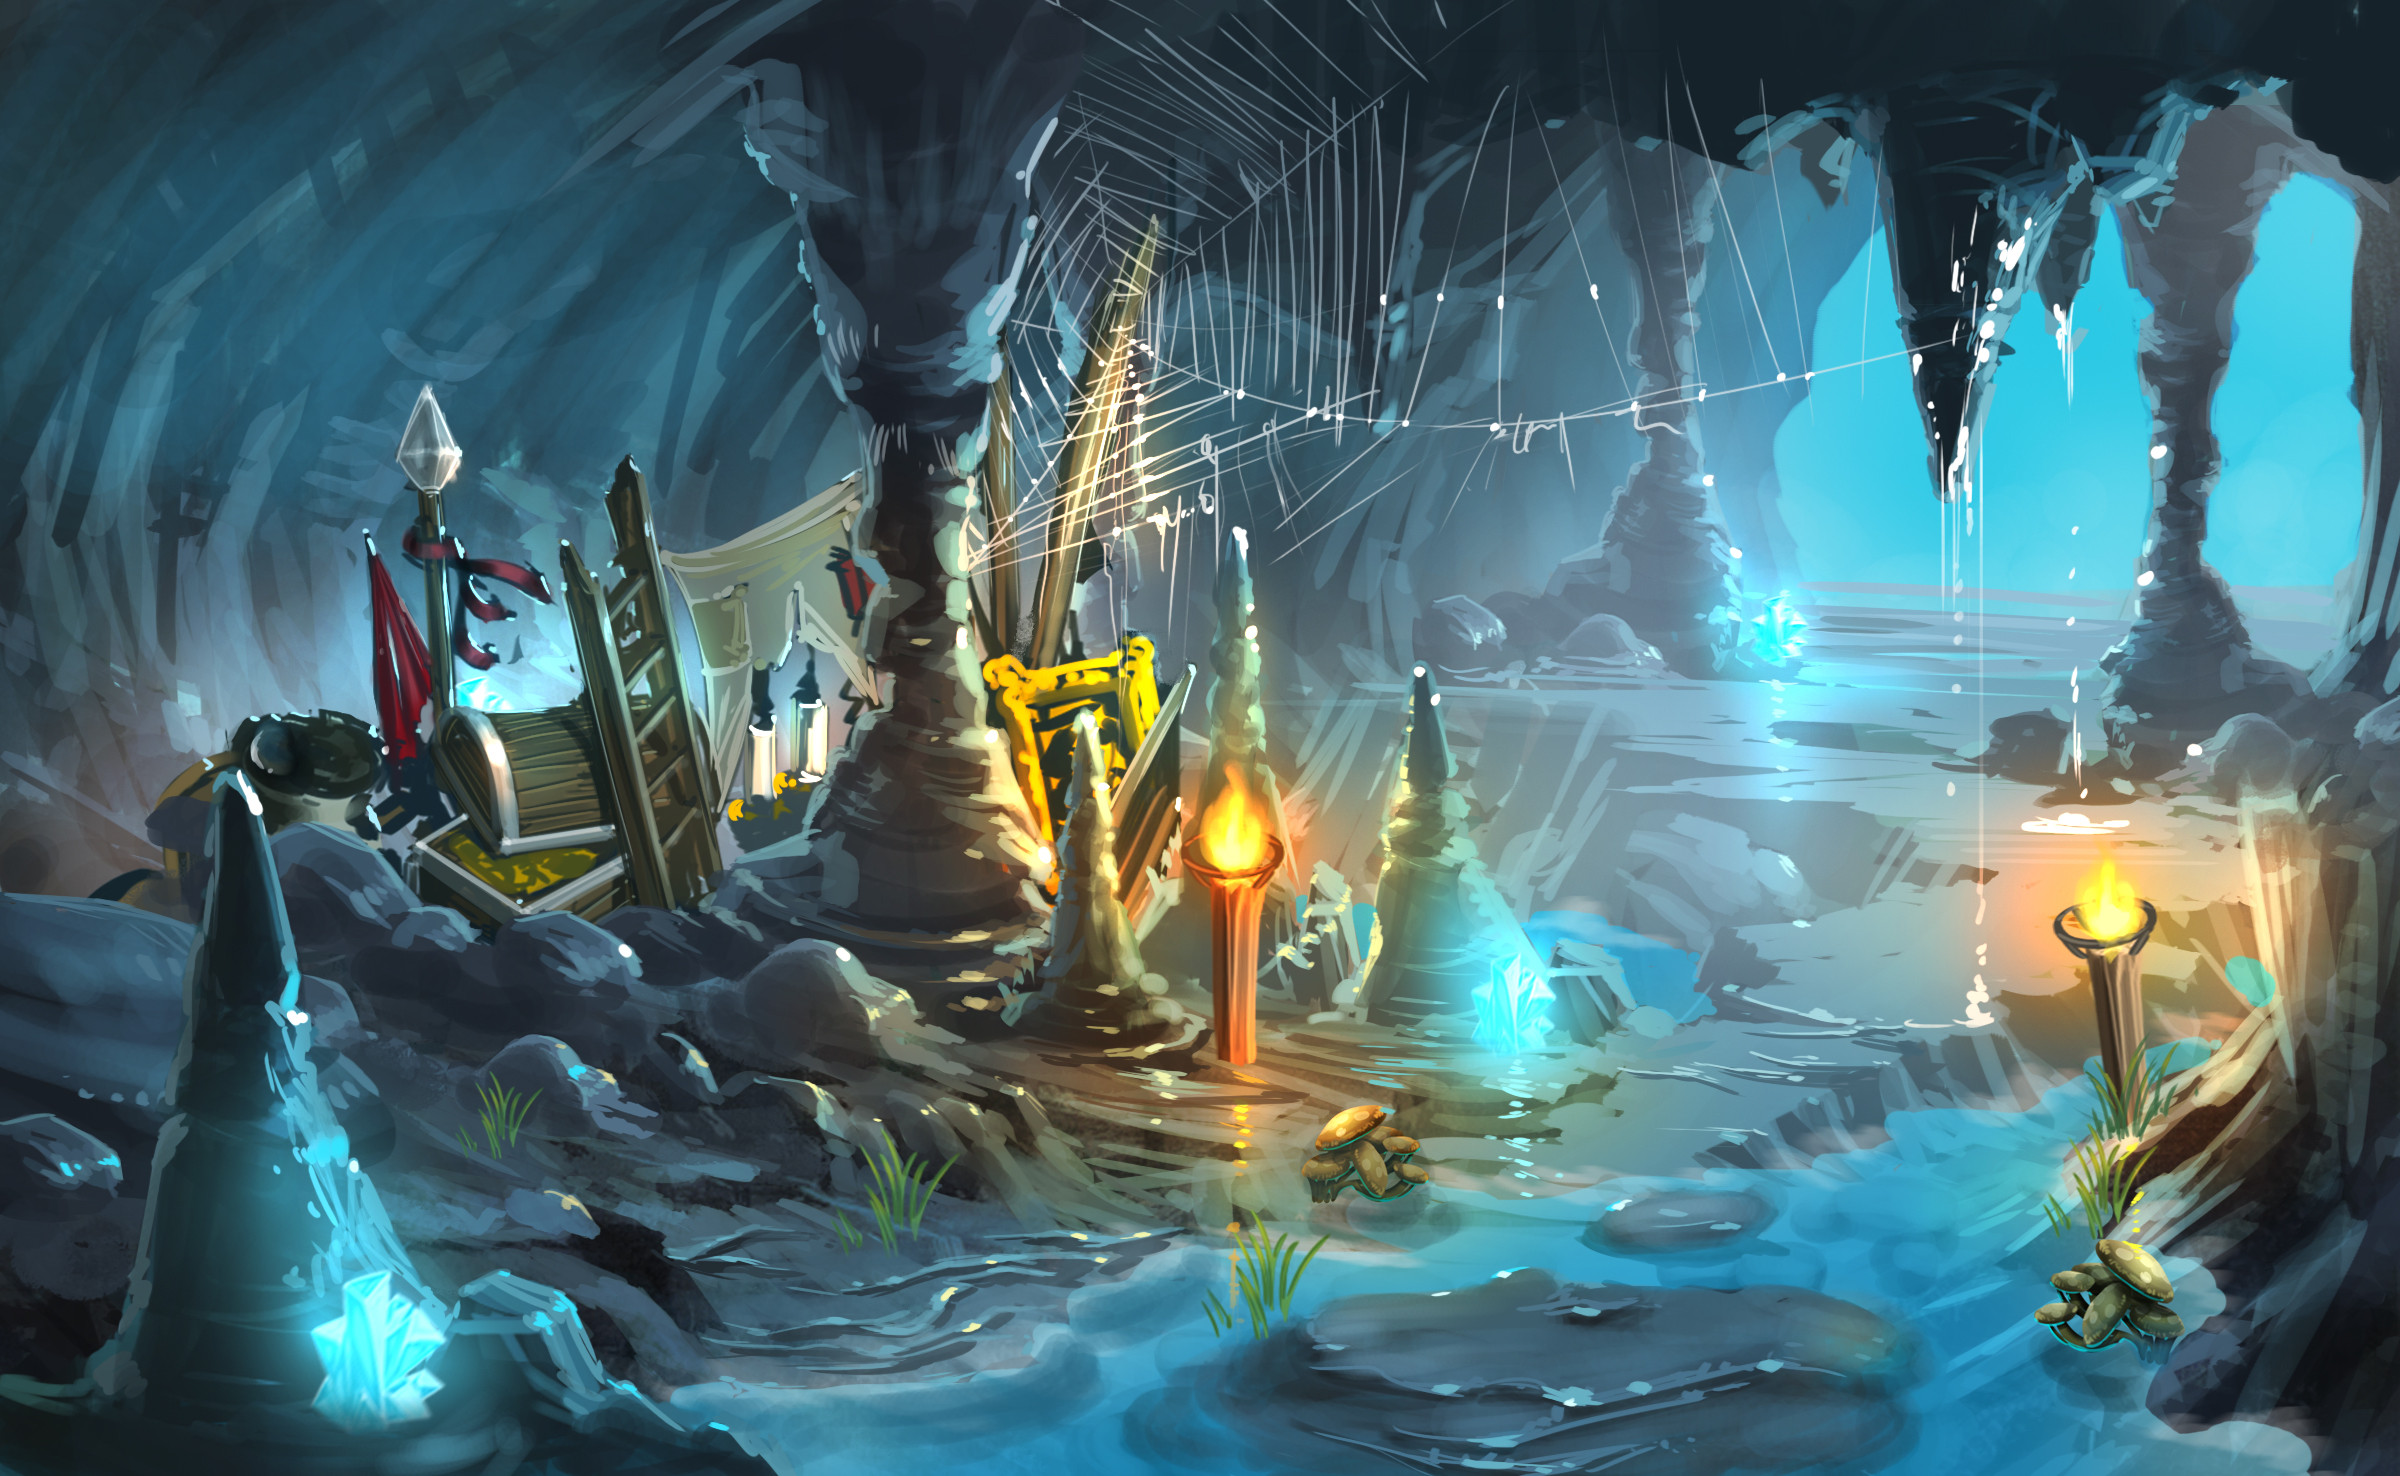 Cave level mood painting